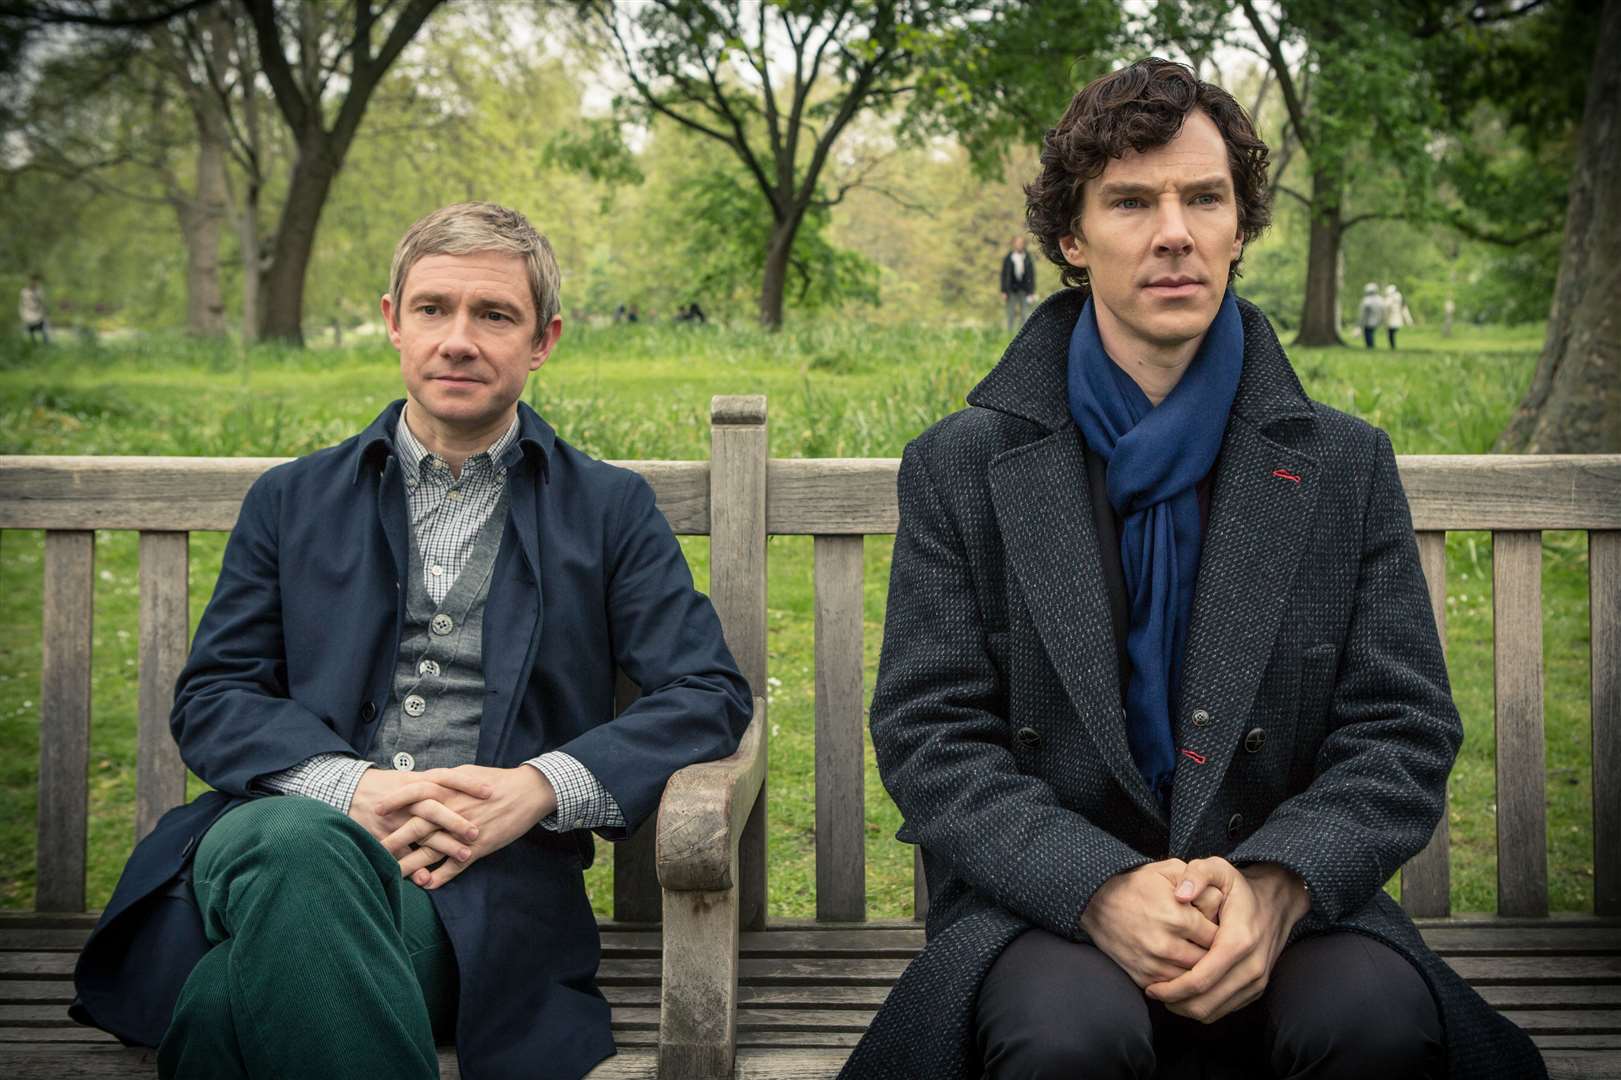 Sherlock: The Official Outdoor Game gives you the chance to solve clues like Benedict Cumberbatch (right) as Sherlock and Martin Freeman as Dr Watson